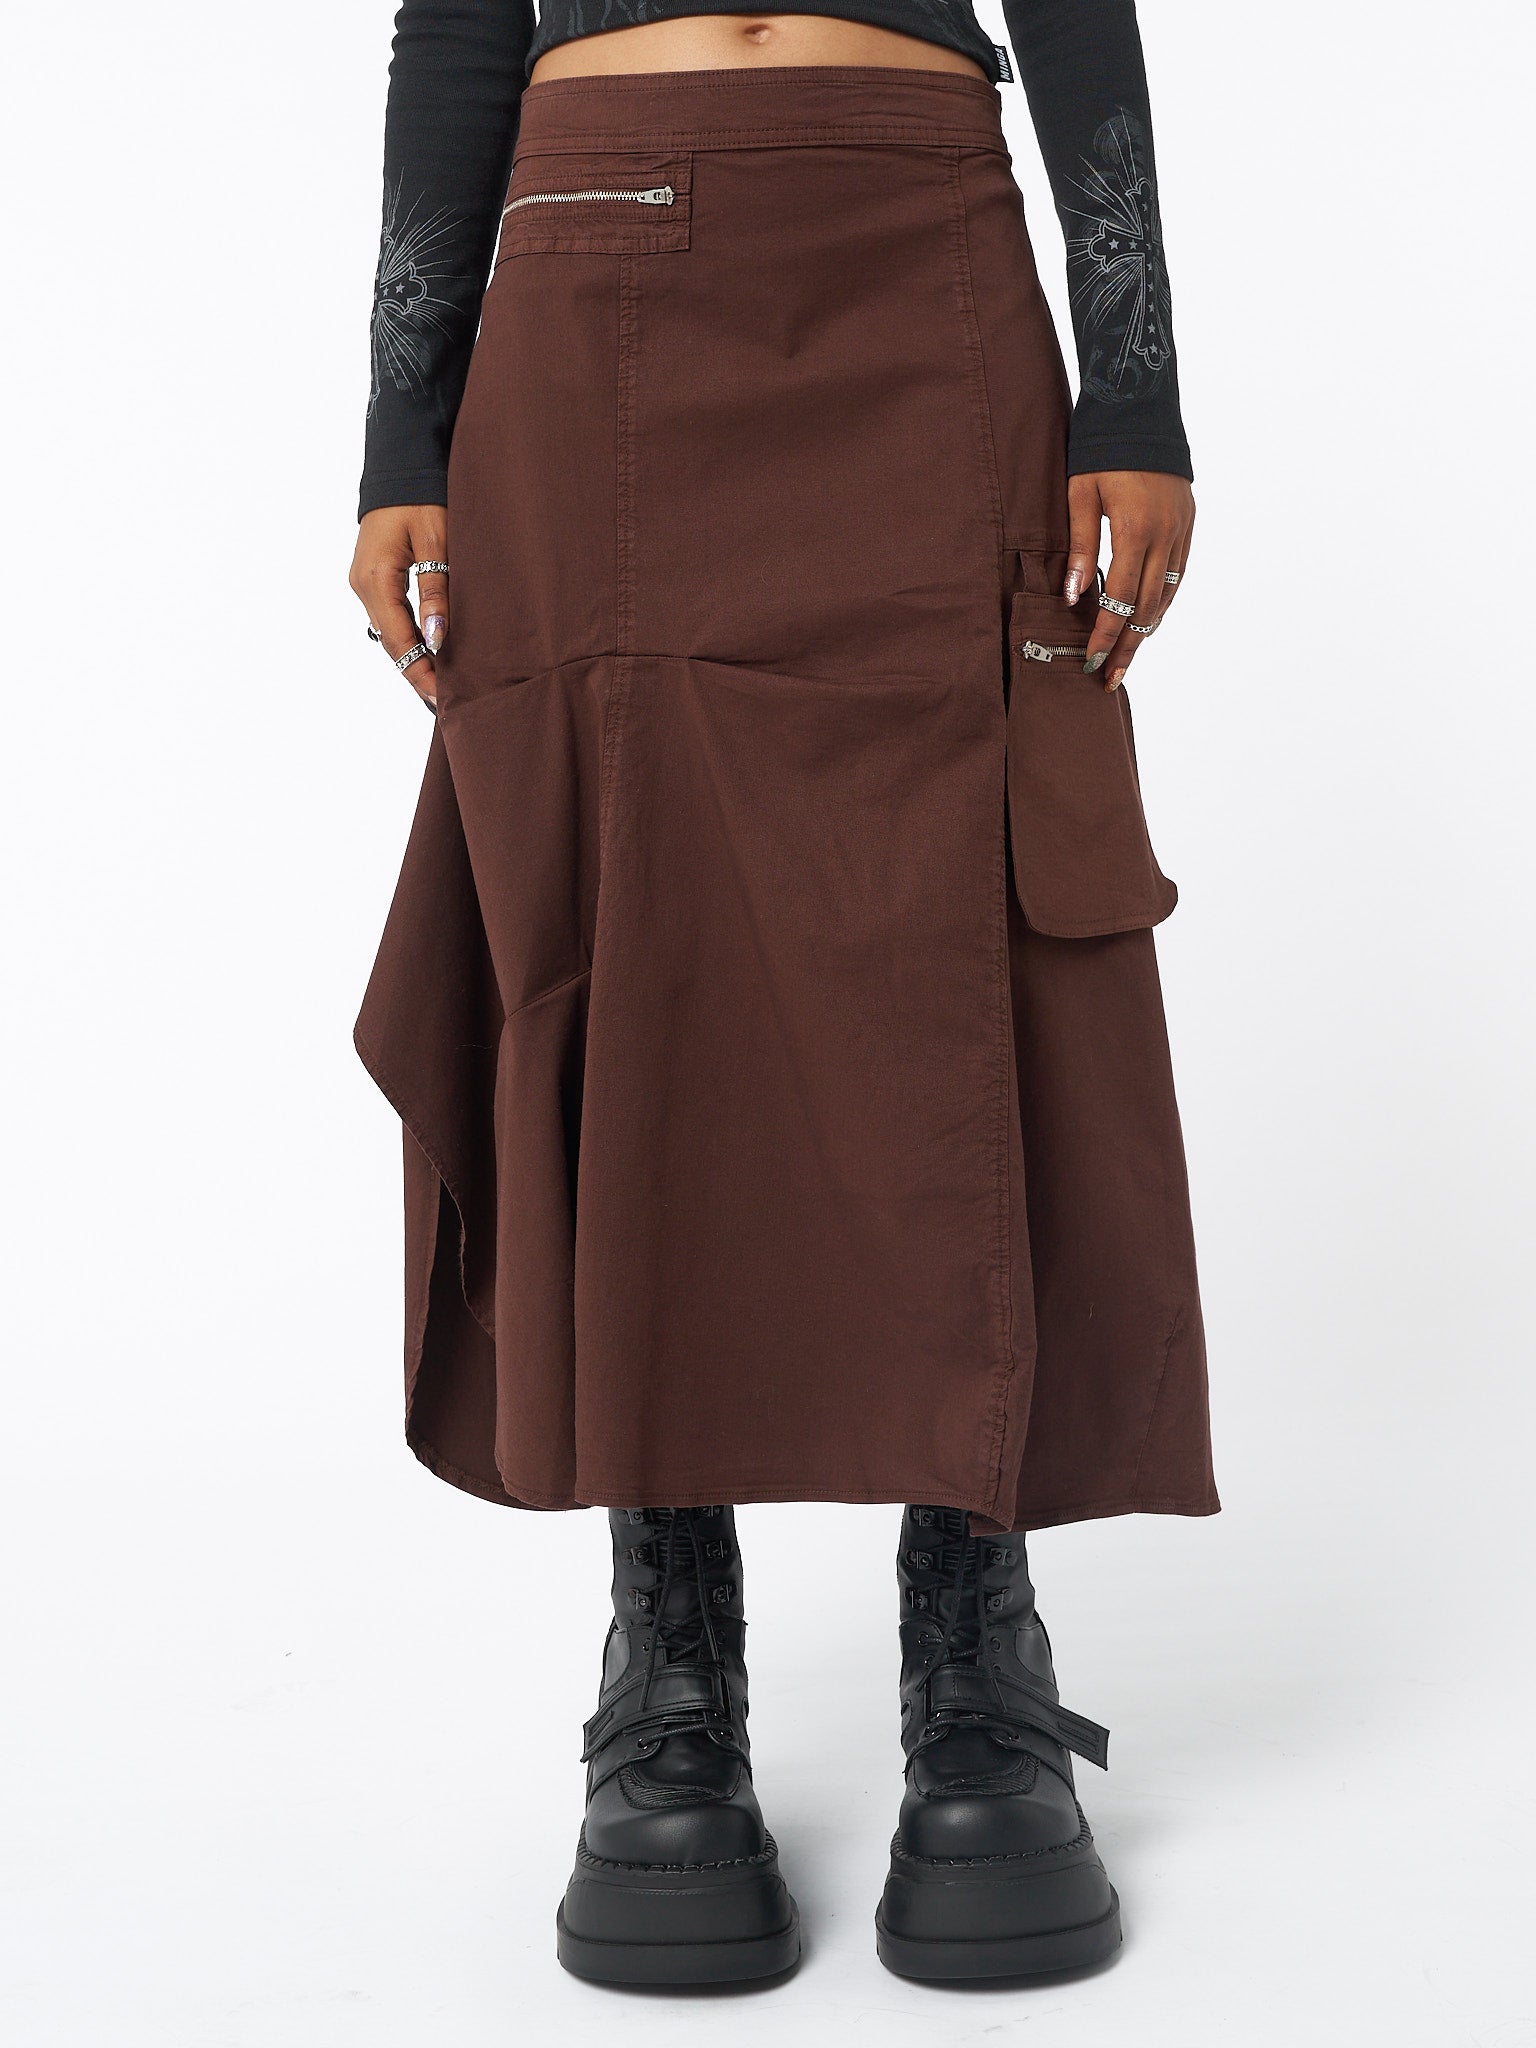 Maxi tech cargo skirt in brown with asymmetric style, zip details and front hanging pocket